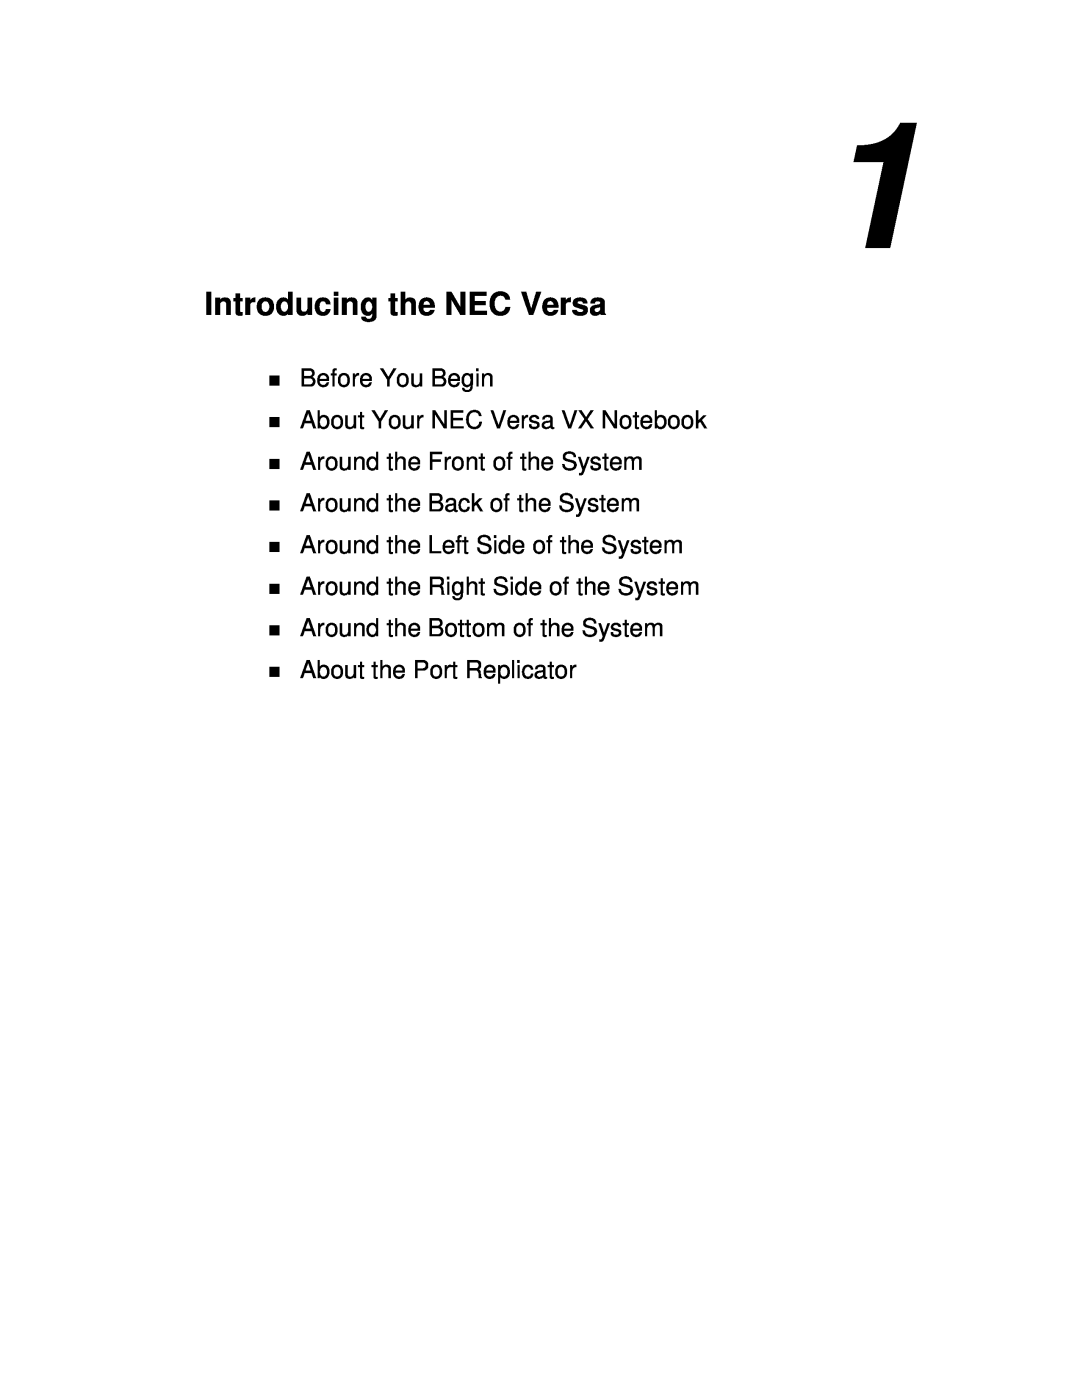 NEC Introducing the NEC Versa, Before You Begin About Your NEC Versa VX Notebook, Around the Left Side of the System 